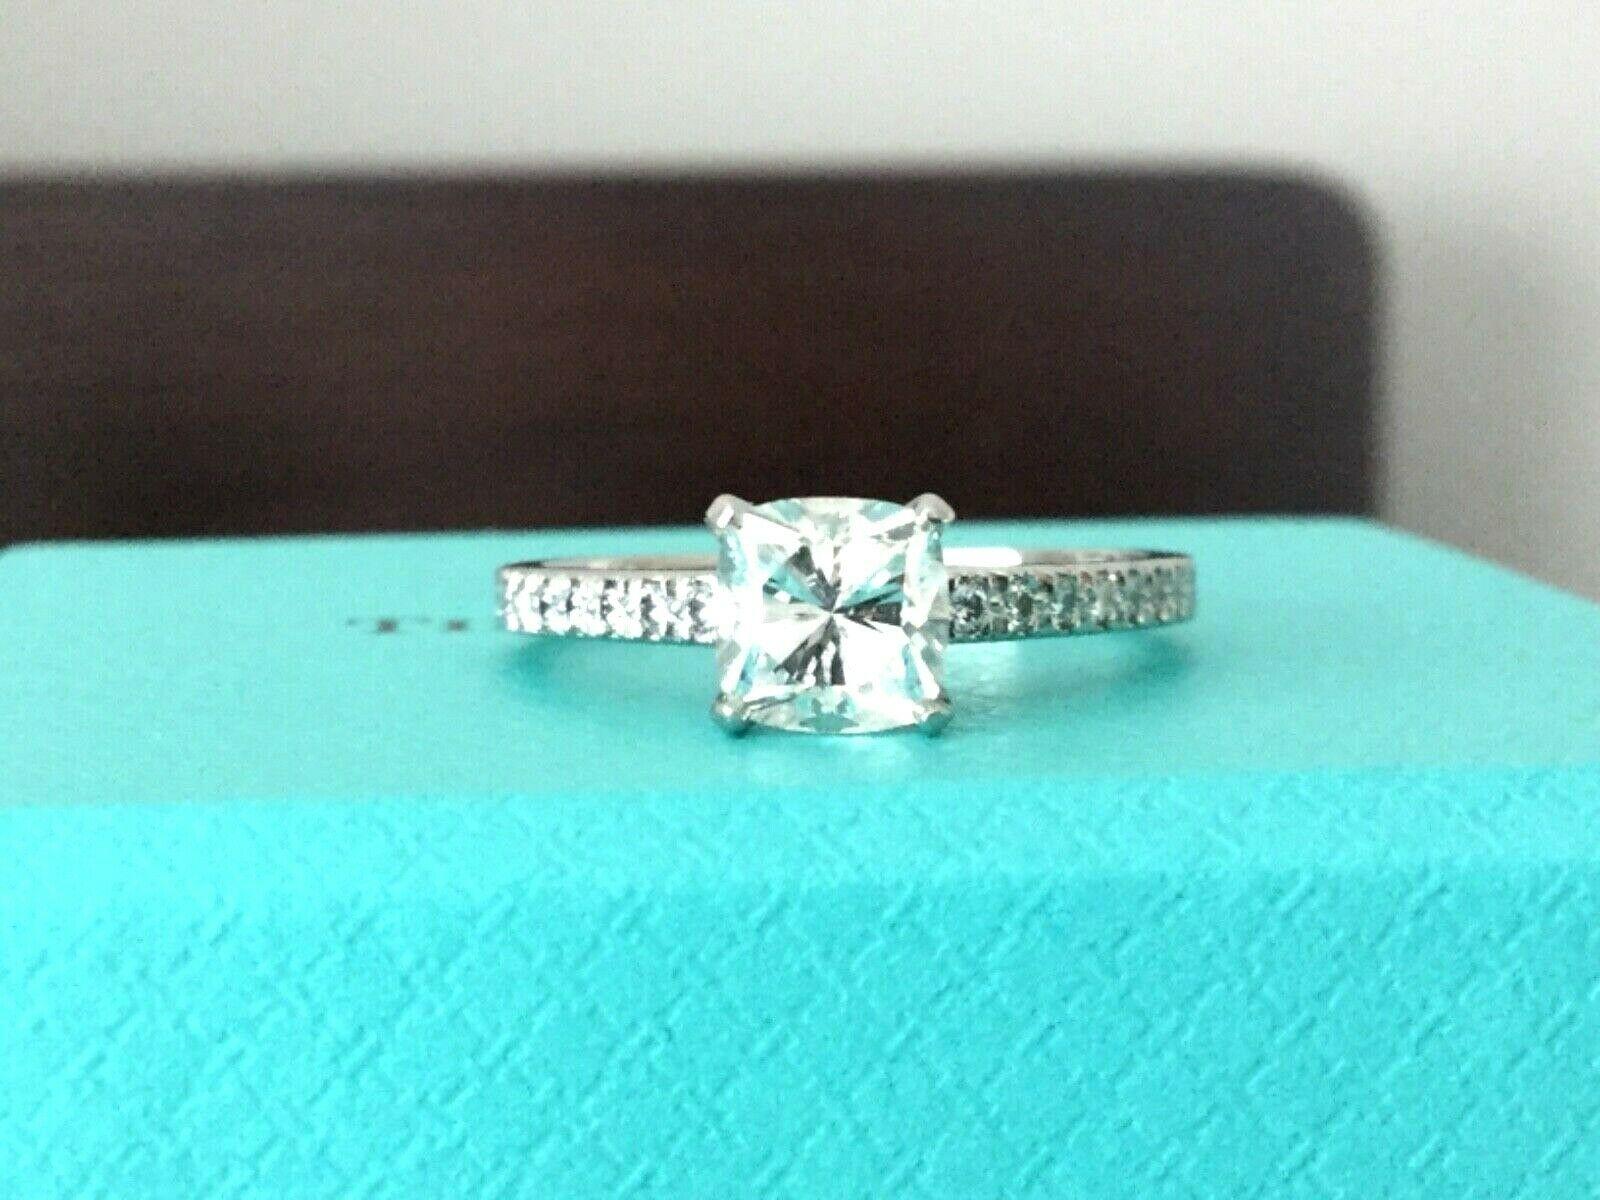 Being offered for your consideration is a like new Tiffany & Co Platinum and Diamond 1.09 carat natural cushion cut NOVO engagement ring set in the classic NOVO pave diamond band..  This ring is in amazing condition!  There are no marks or scratches